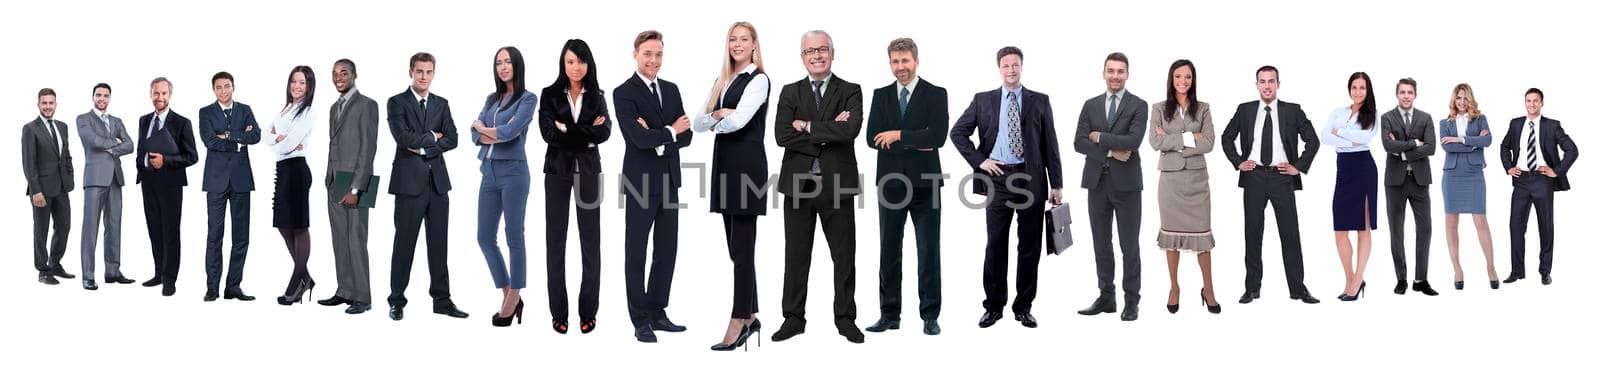 panoramic photo of a professional numerous business team.isolated on white background.